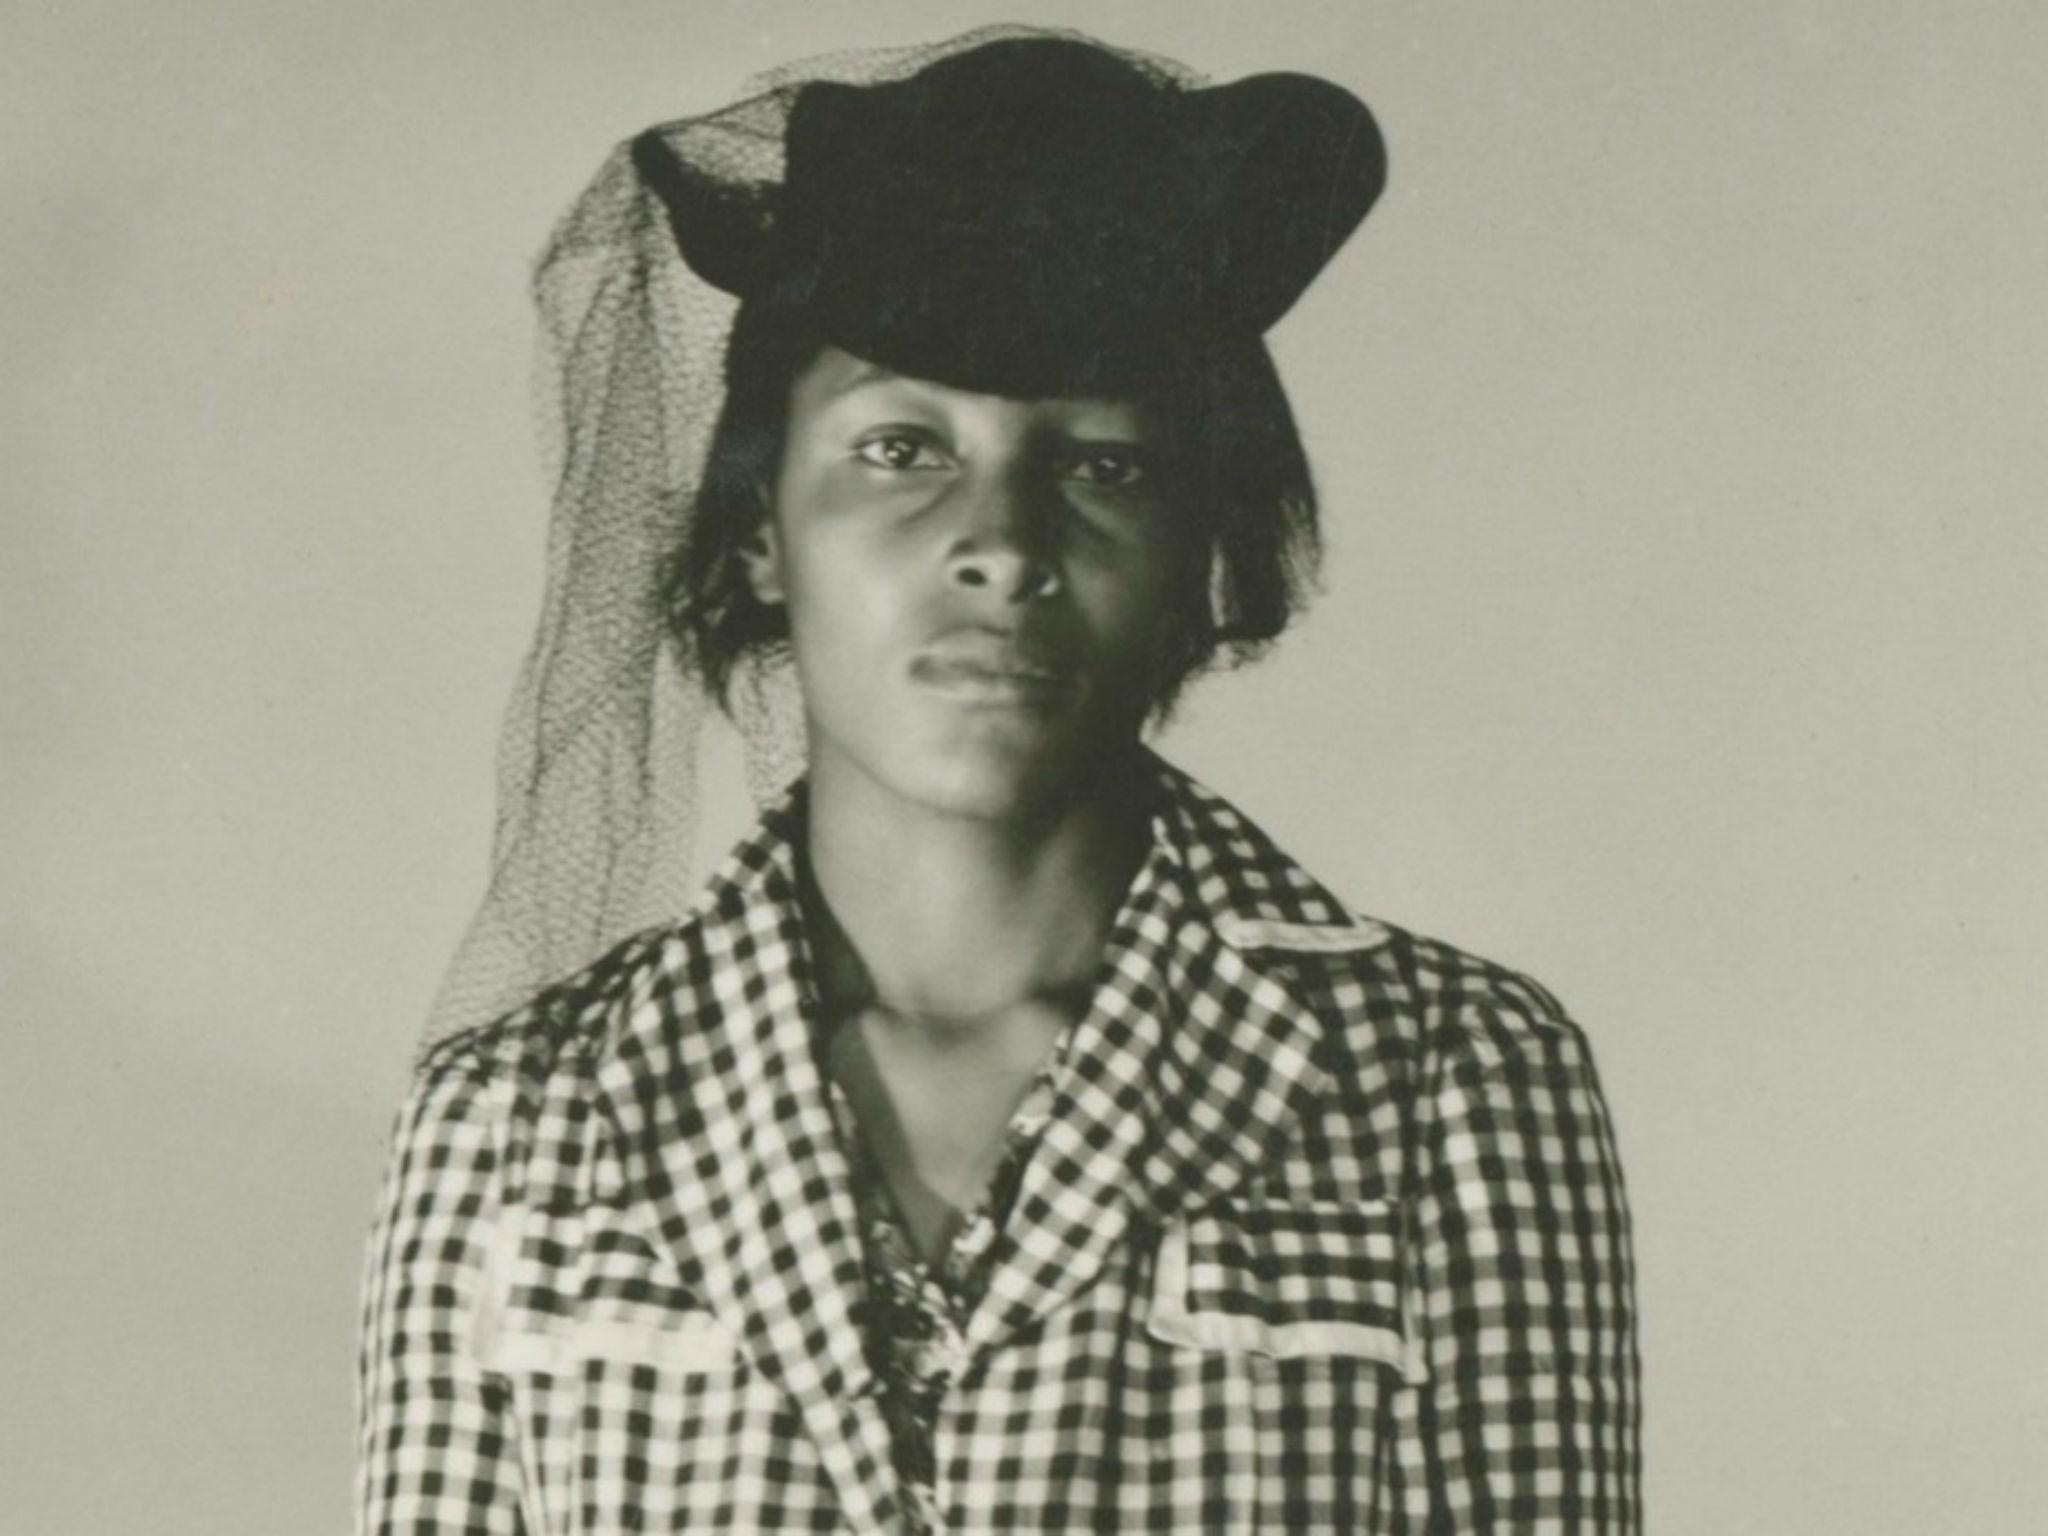 Recy Taylor's case became an important staging post in the civil rights movement but she herself was left behind